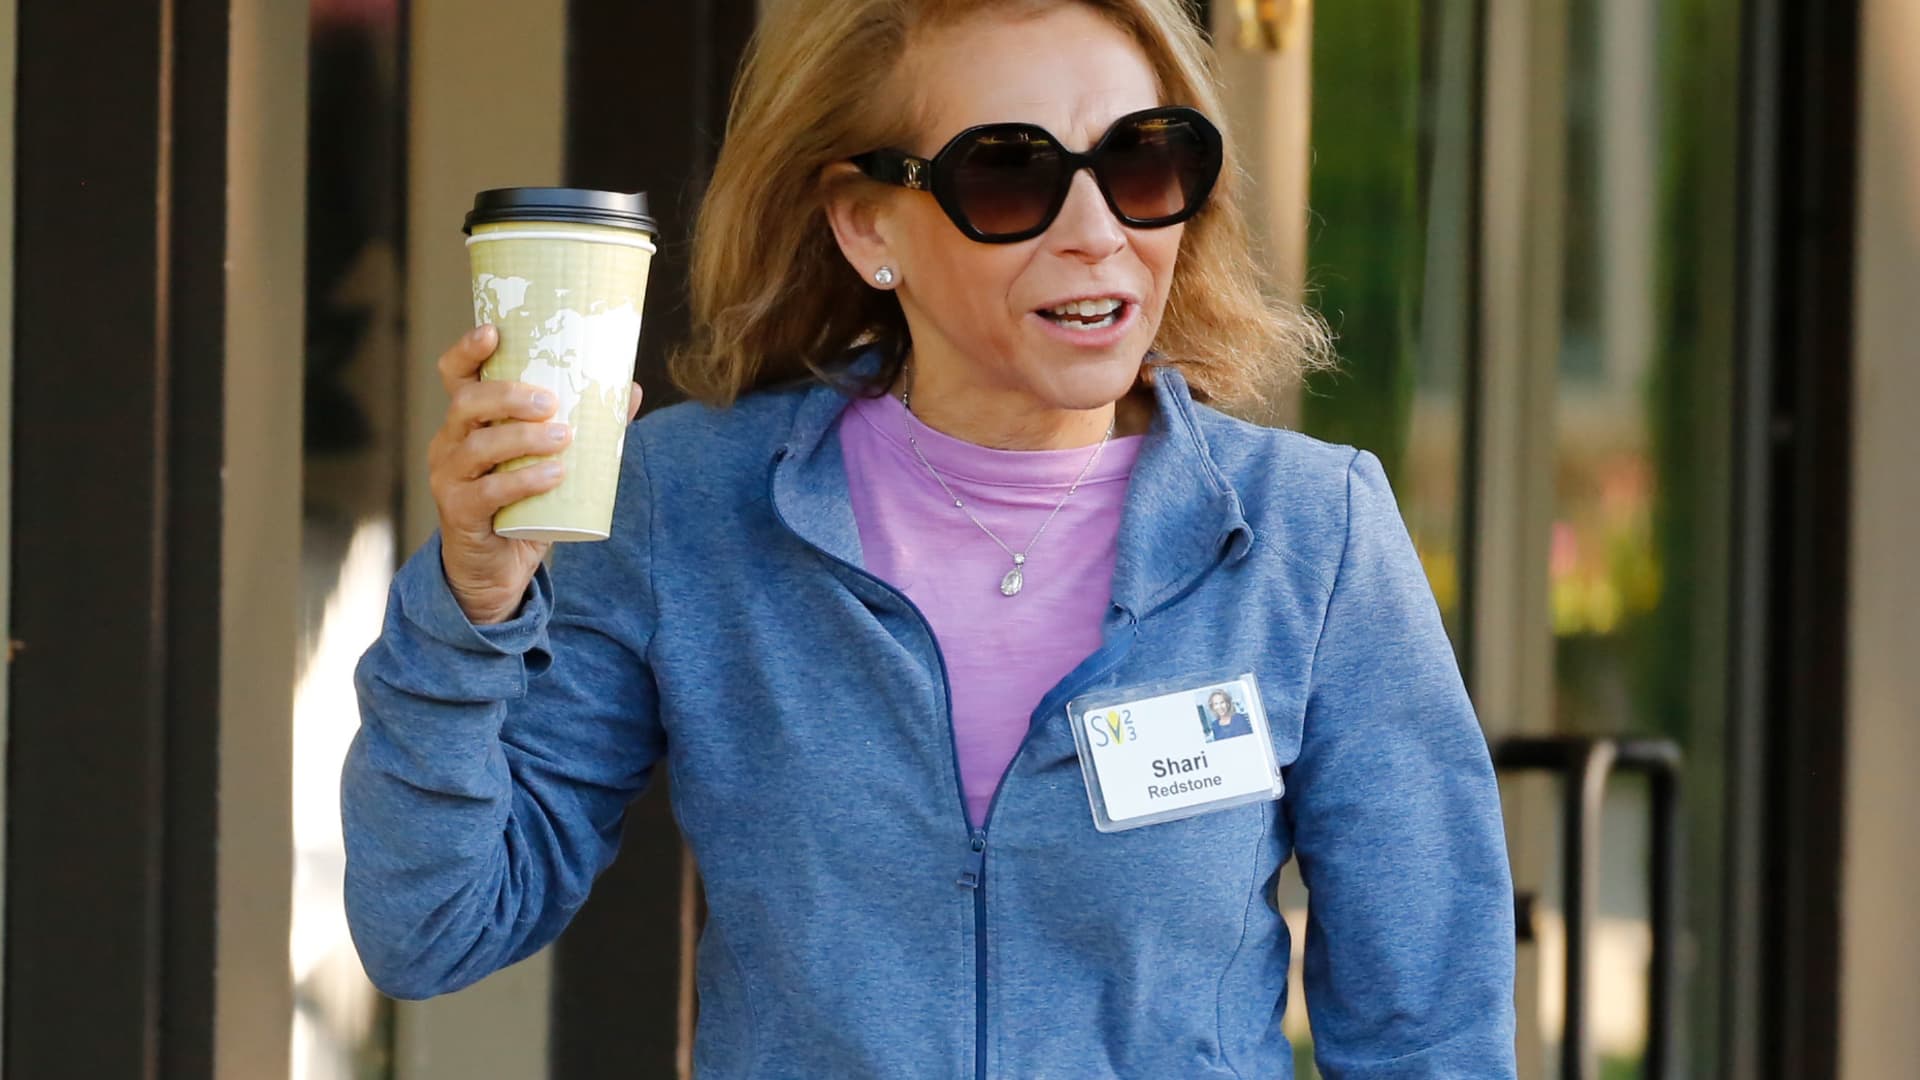 Paramount’s Shari Redstone is open for business, but business may not be open for her